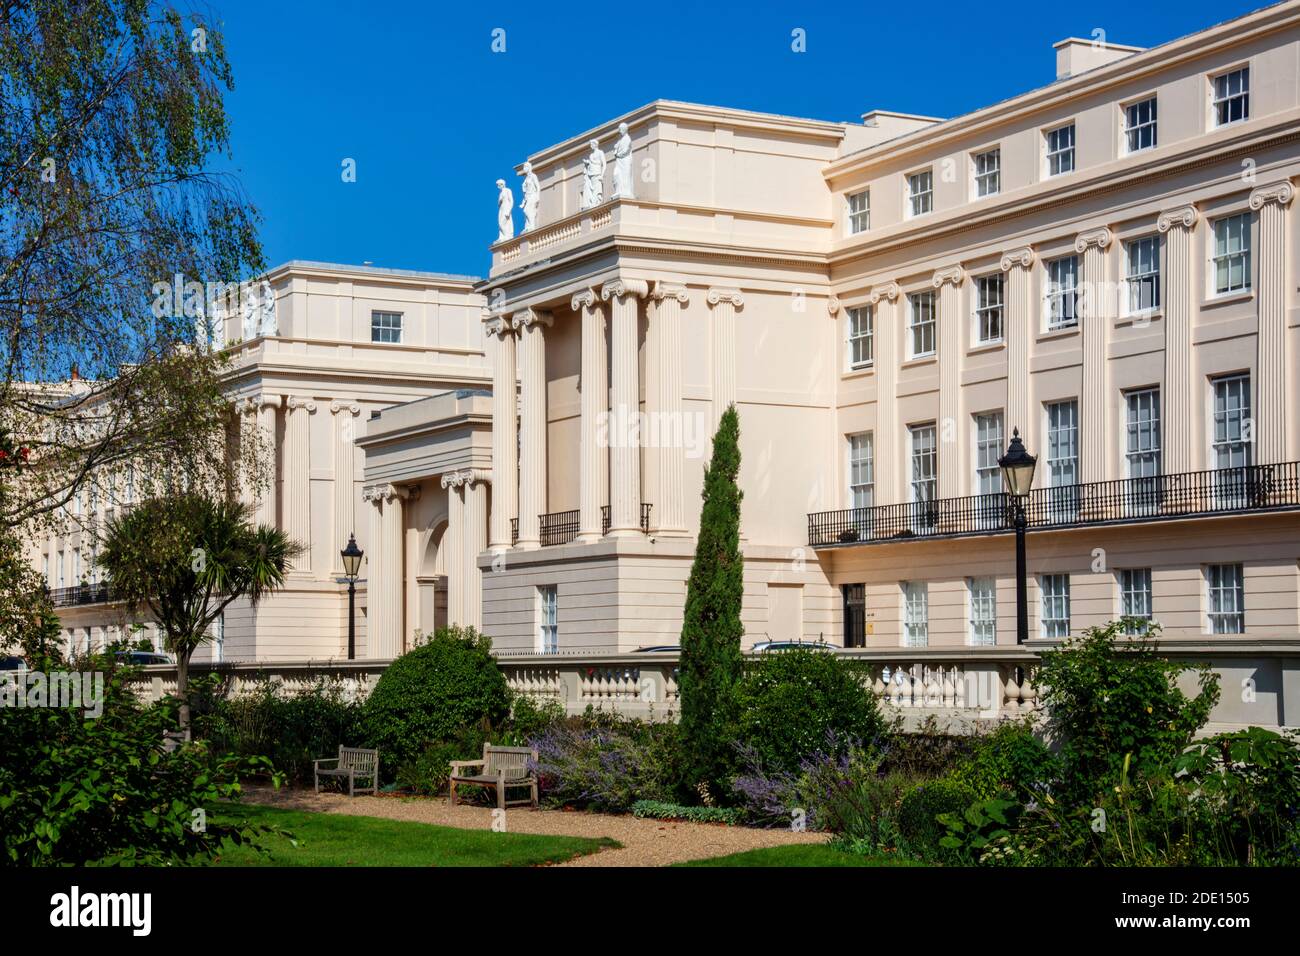 Cumberland Terrace, a row of luxurious Regency era houses by the architect John Nash next to Regents Park in Central London, England, United Kingdom Stock Photo